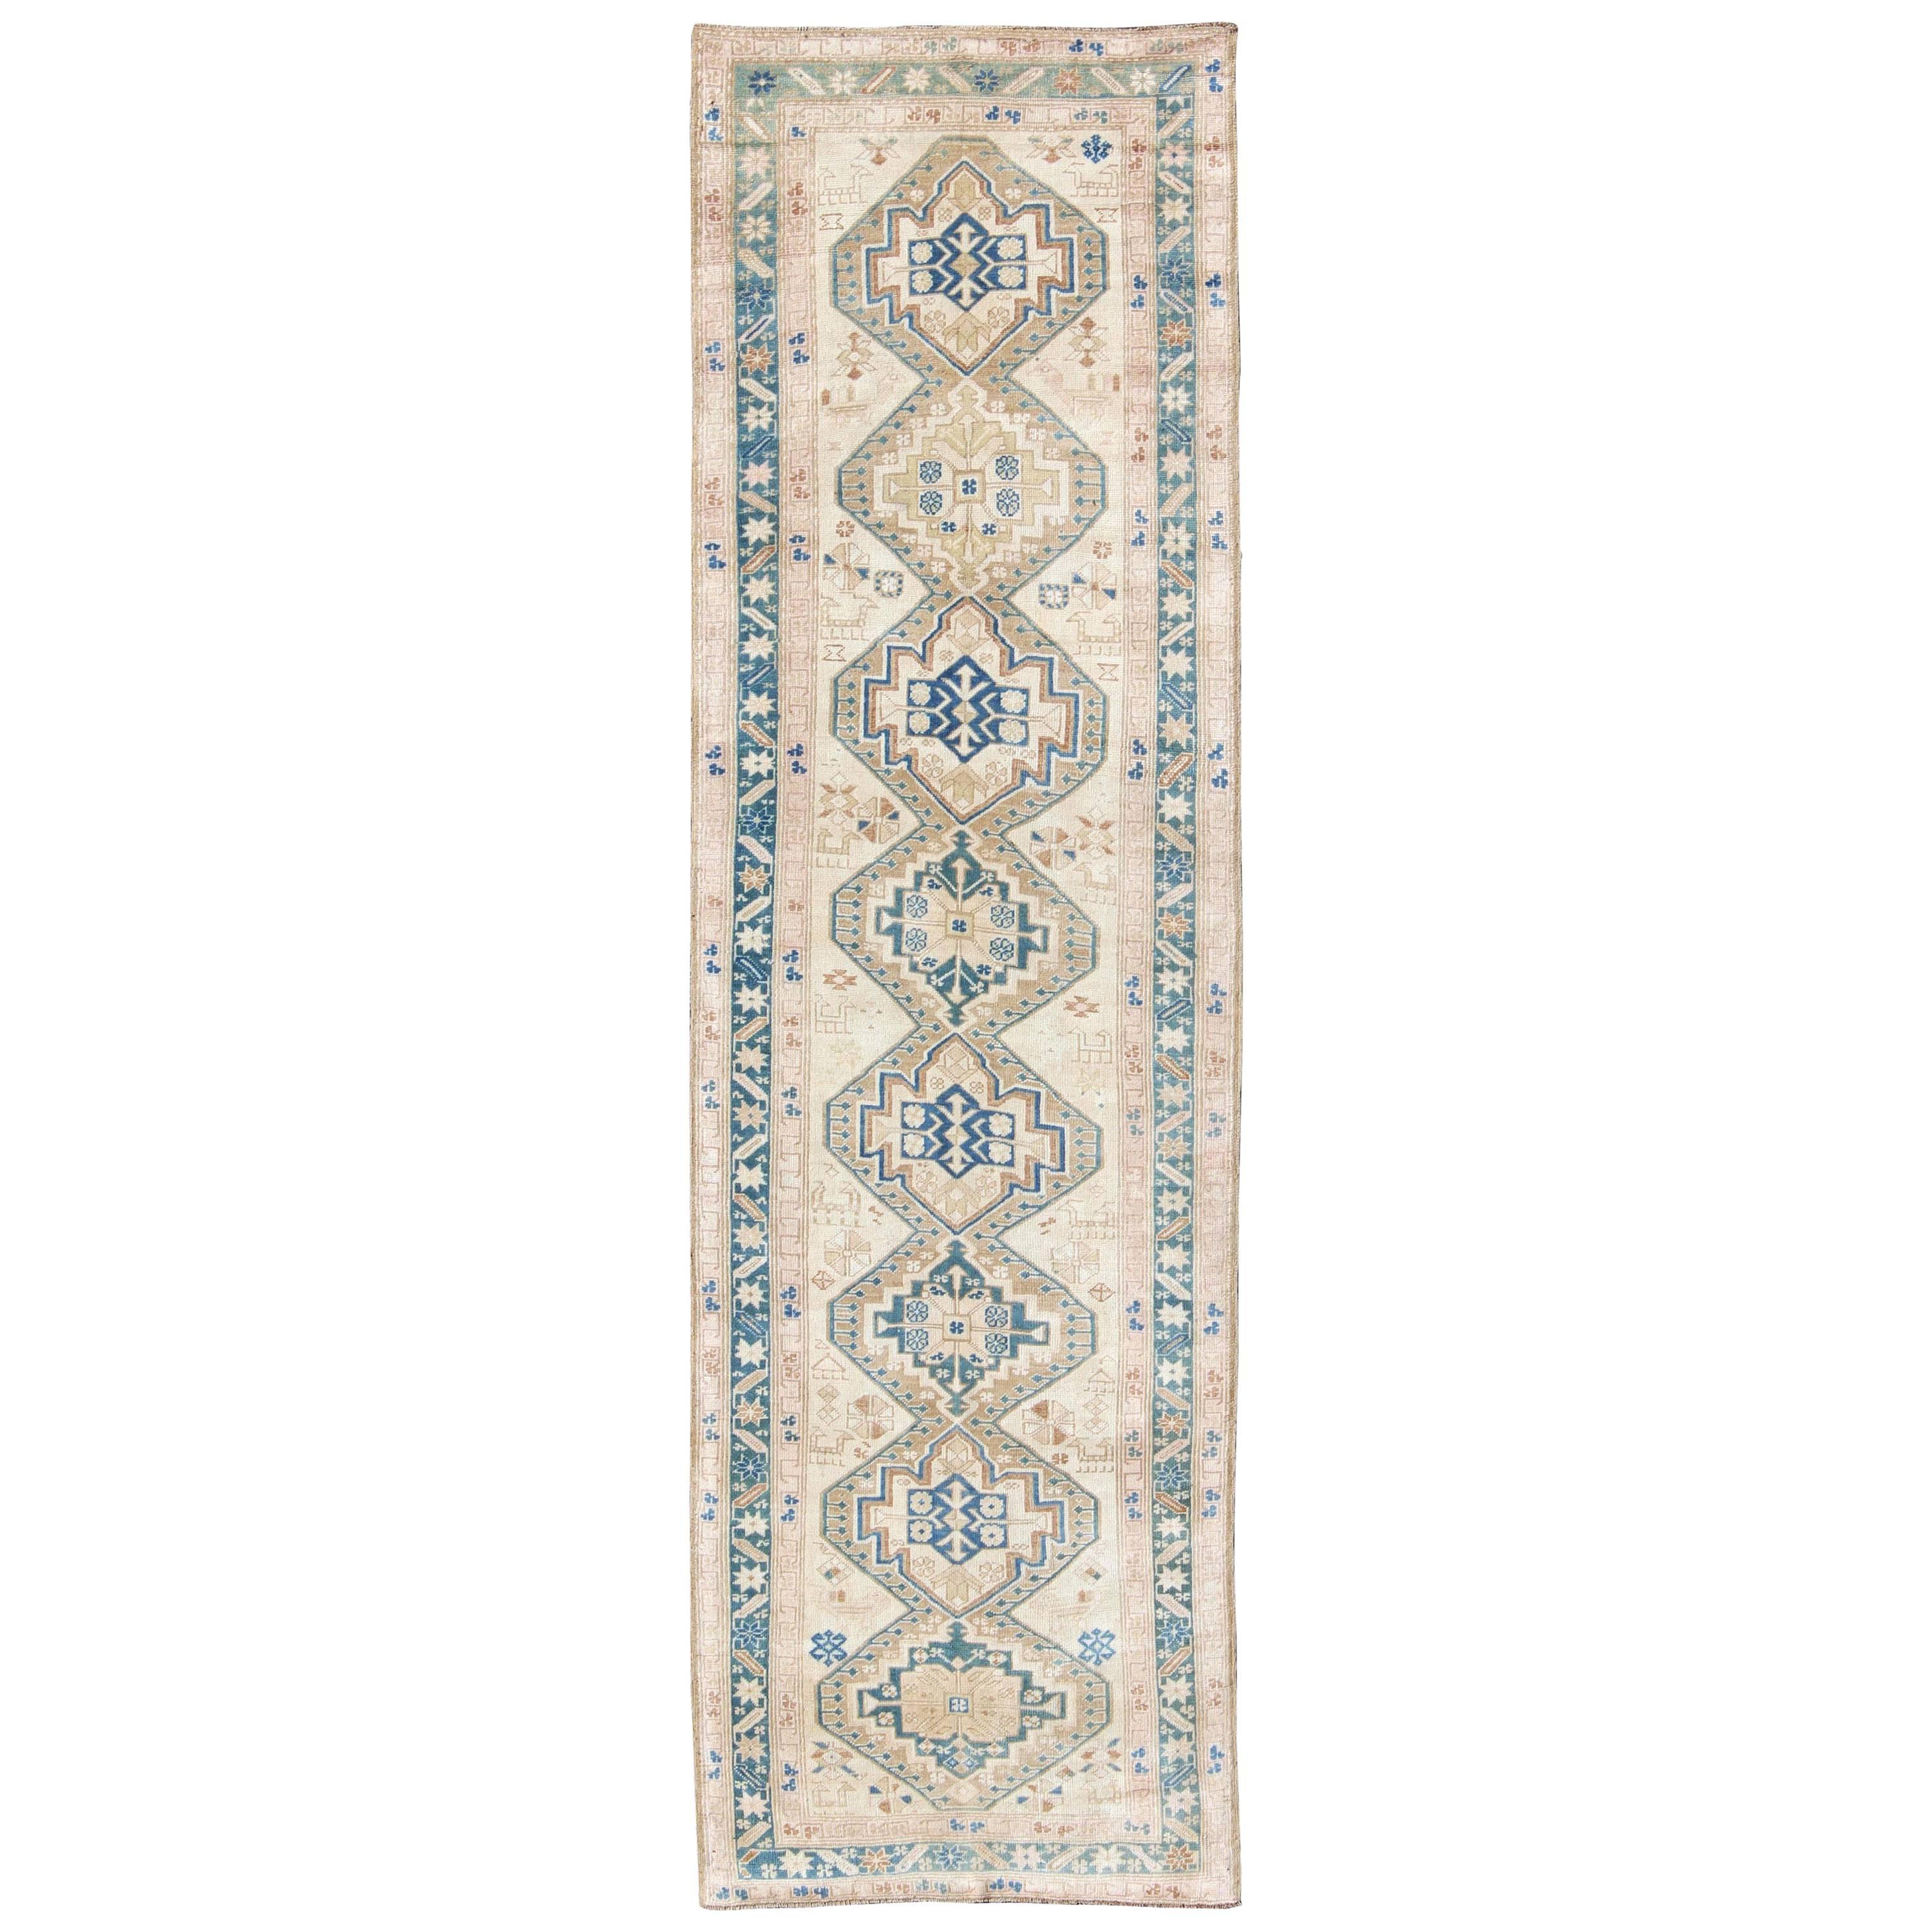 Stacked Medallion Antique Turkish Oushak Rug in Teal, Ivory, Cream and Nude